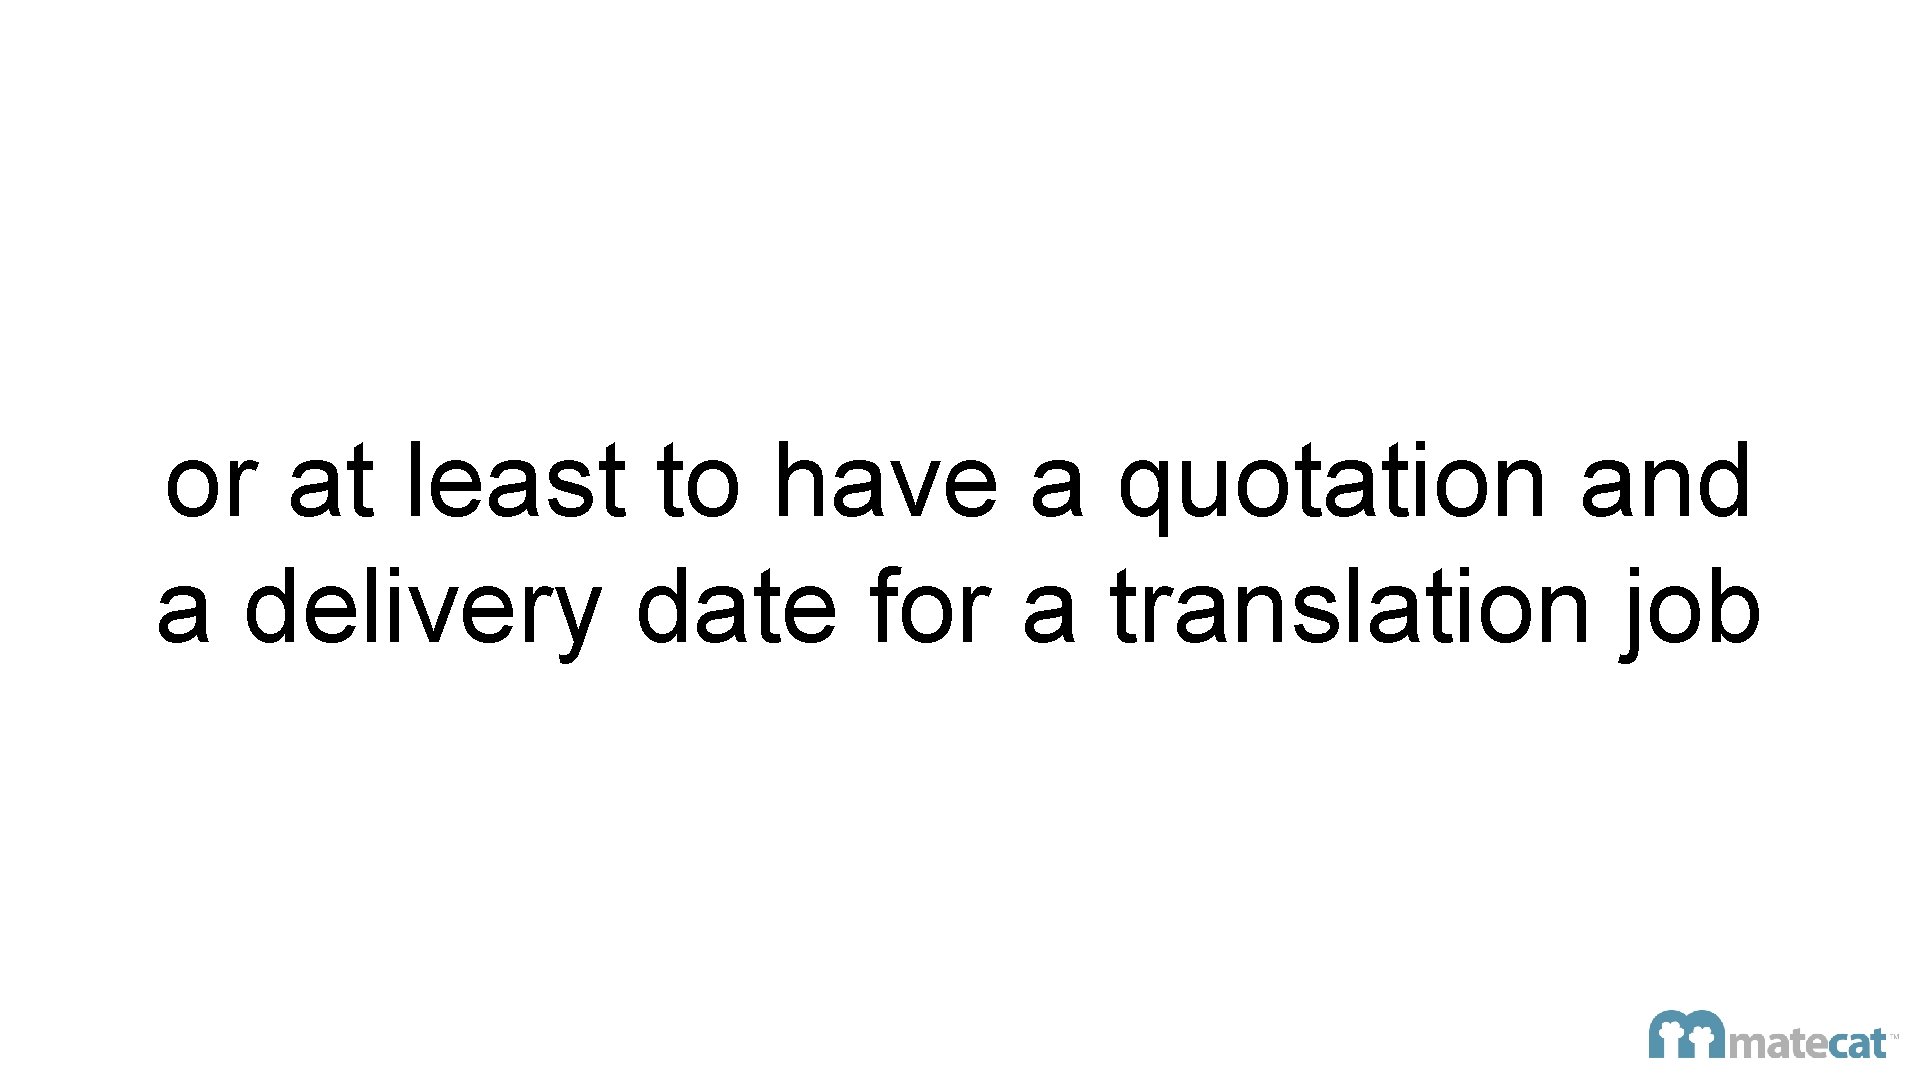 or at least to have a quotation and a delivery date for a translation